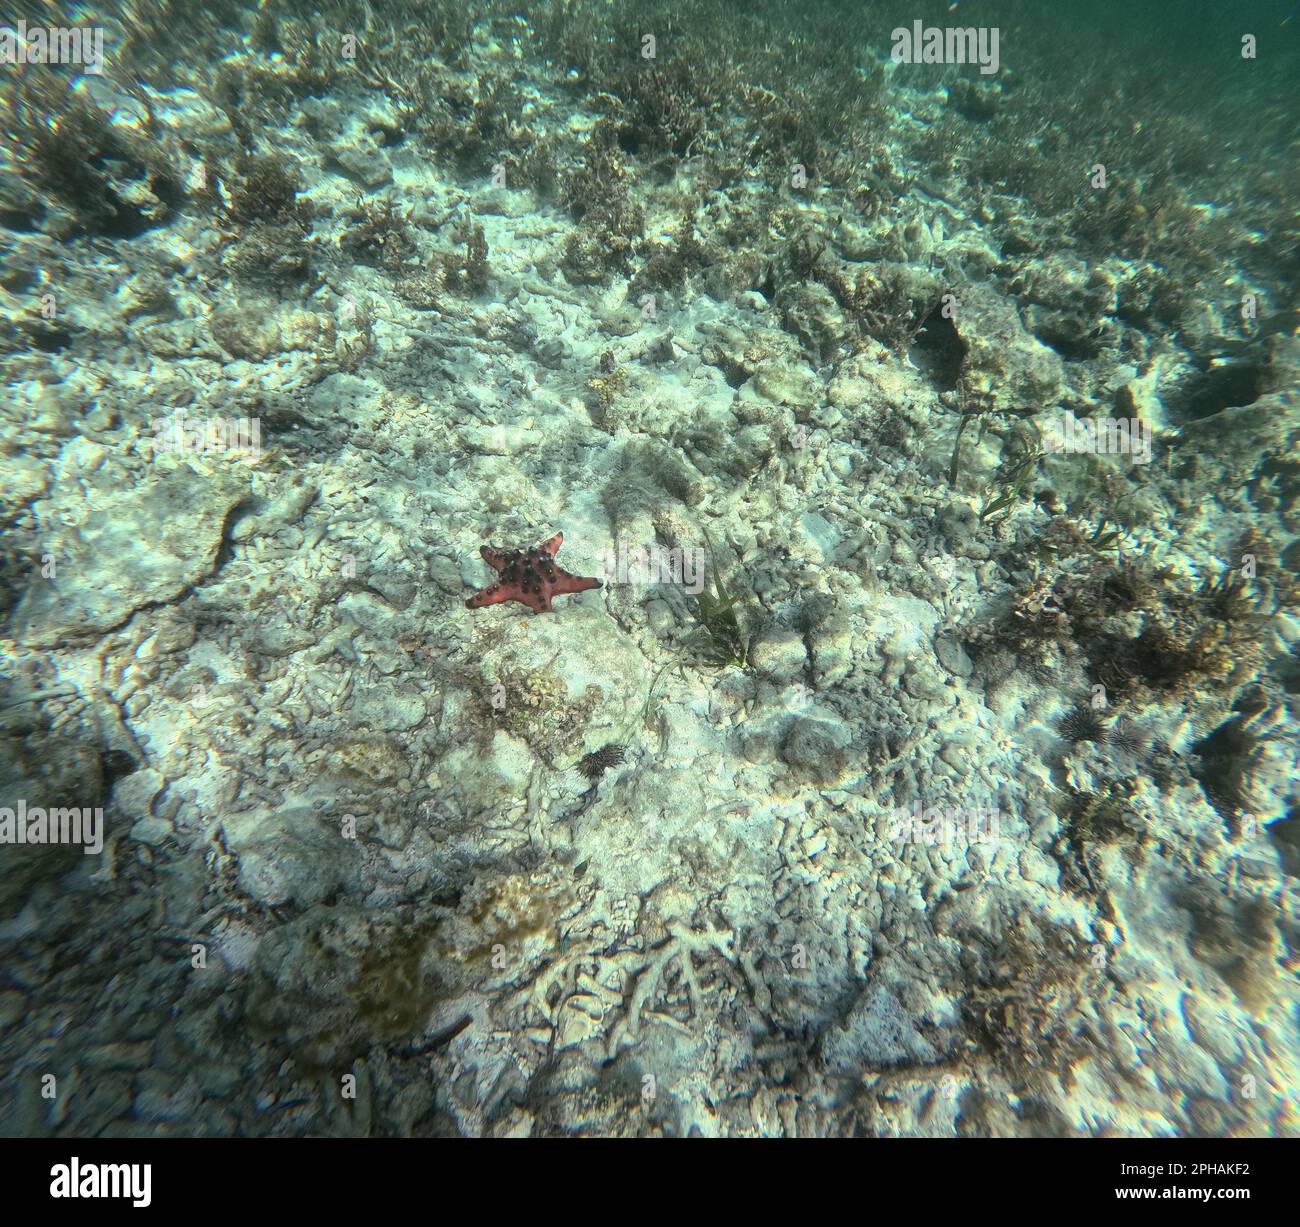 A red starfish on a sun-dappled seabed in Siquijor, Philippines. Stock Photo